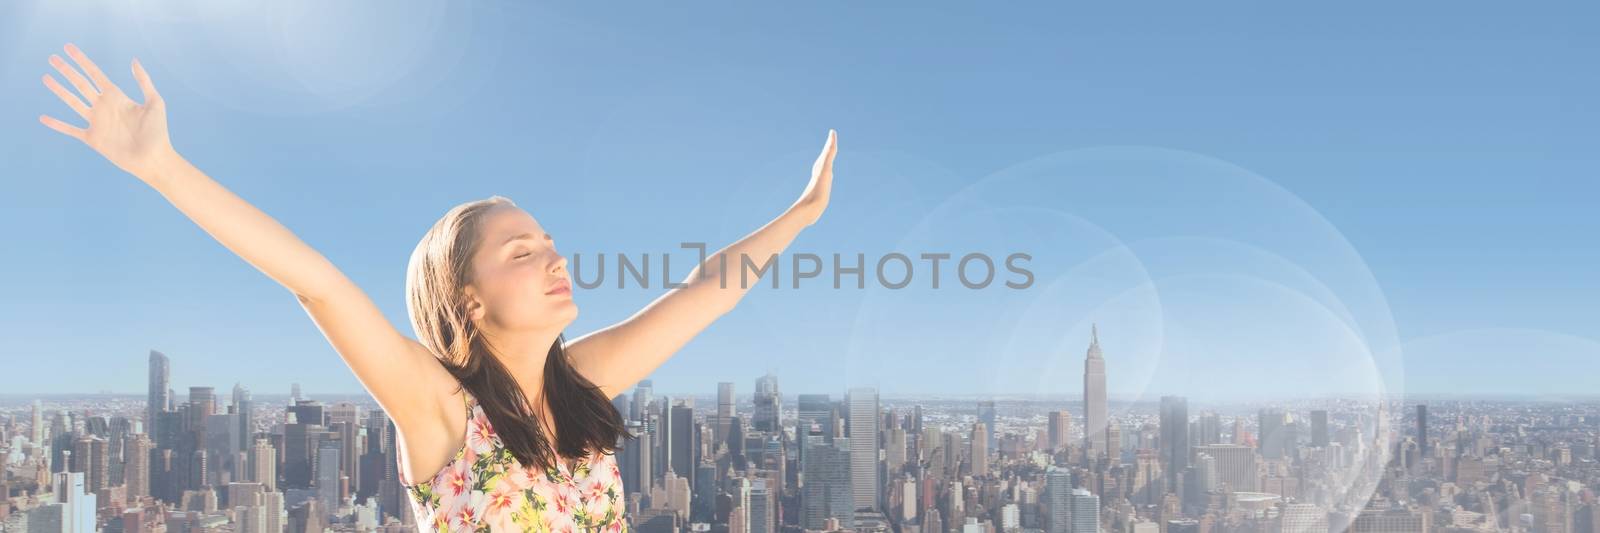 Digital composite of Millennial woman with arms out against skyline and Summer sky with flare